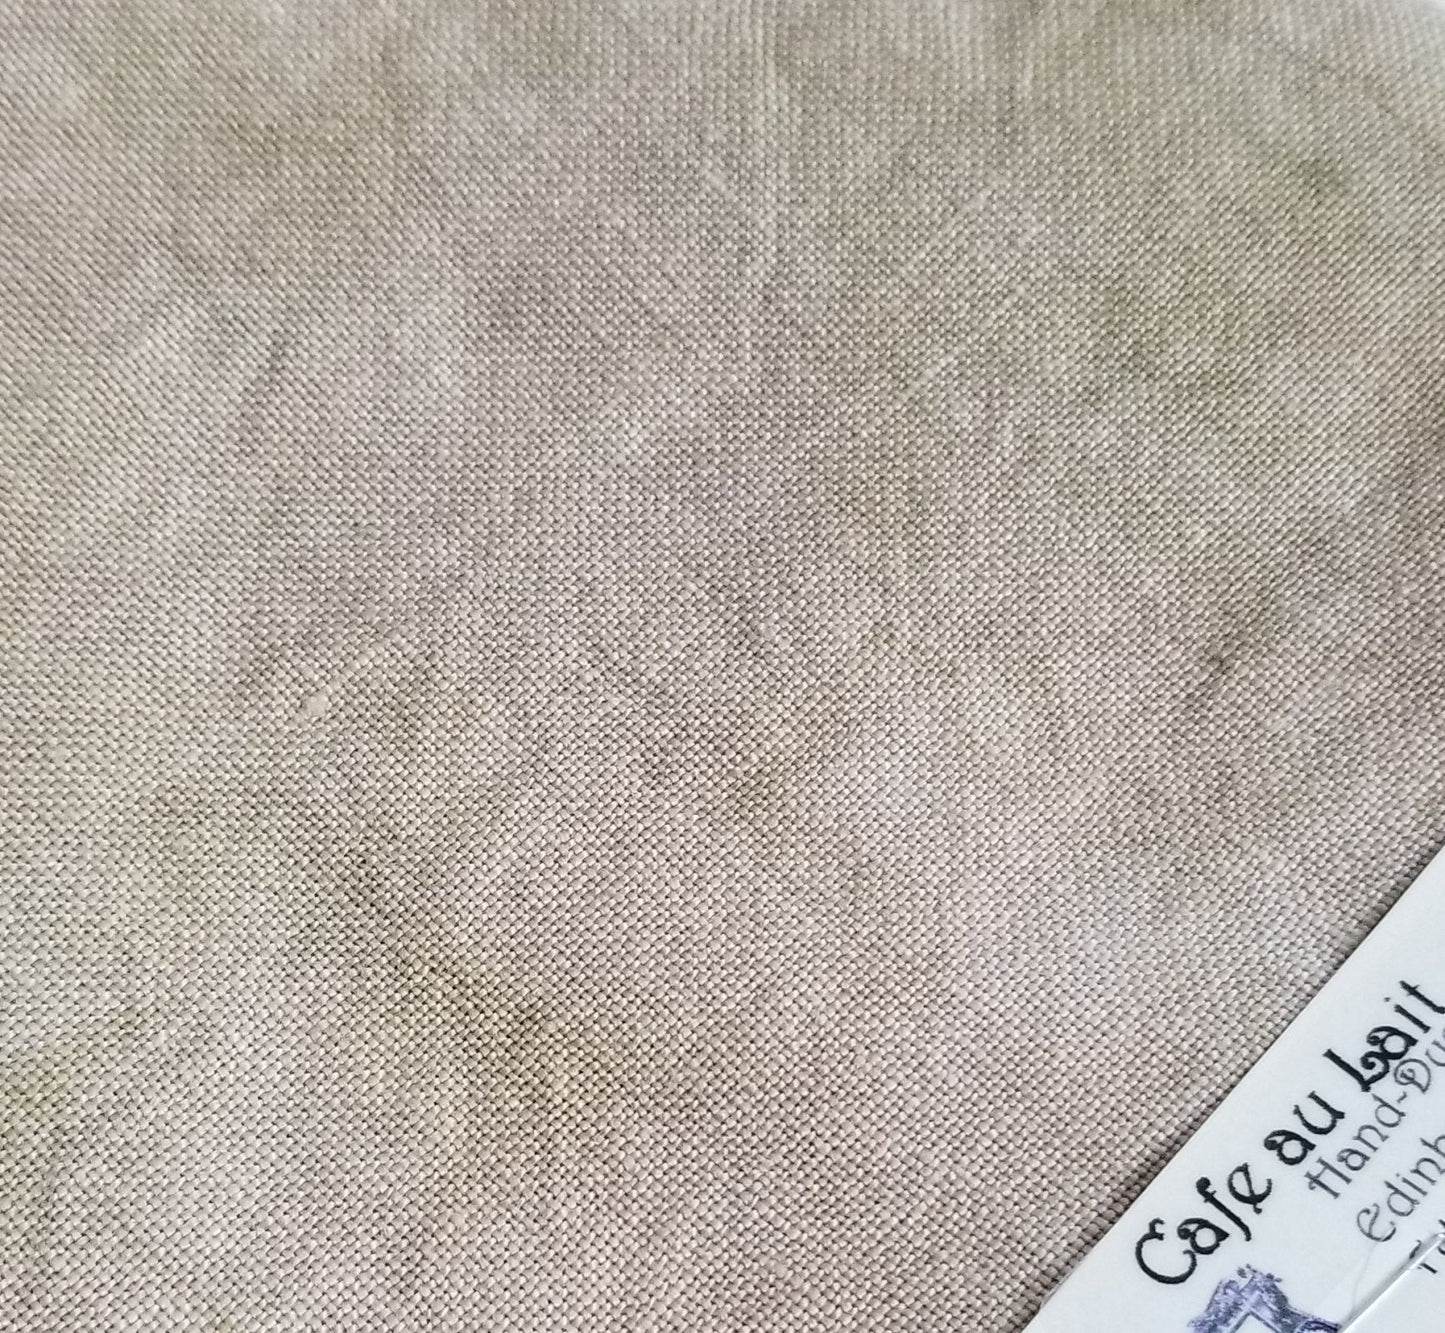 16 Count Aida - Cafe au Lait - Fiber on a Whim, Fabric, The Crafty Grimalkin - A Cross Stitch Store